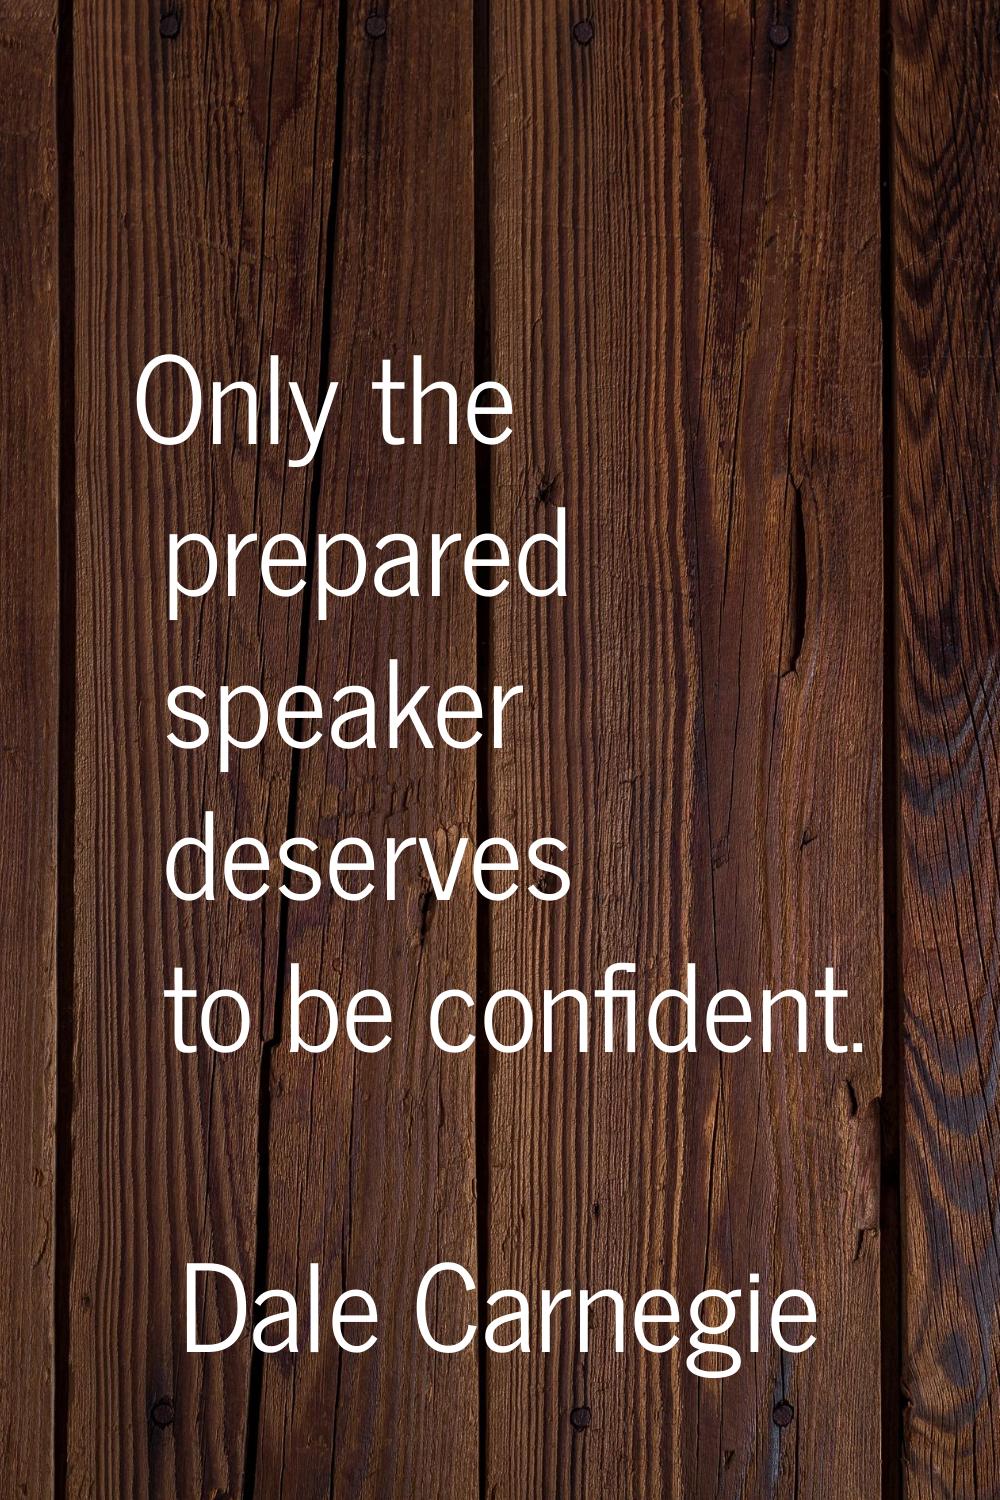 Only the prepared speaker deserves to be confident.